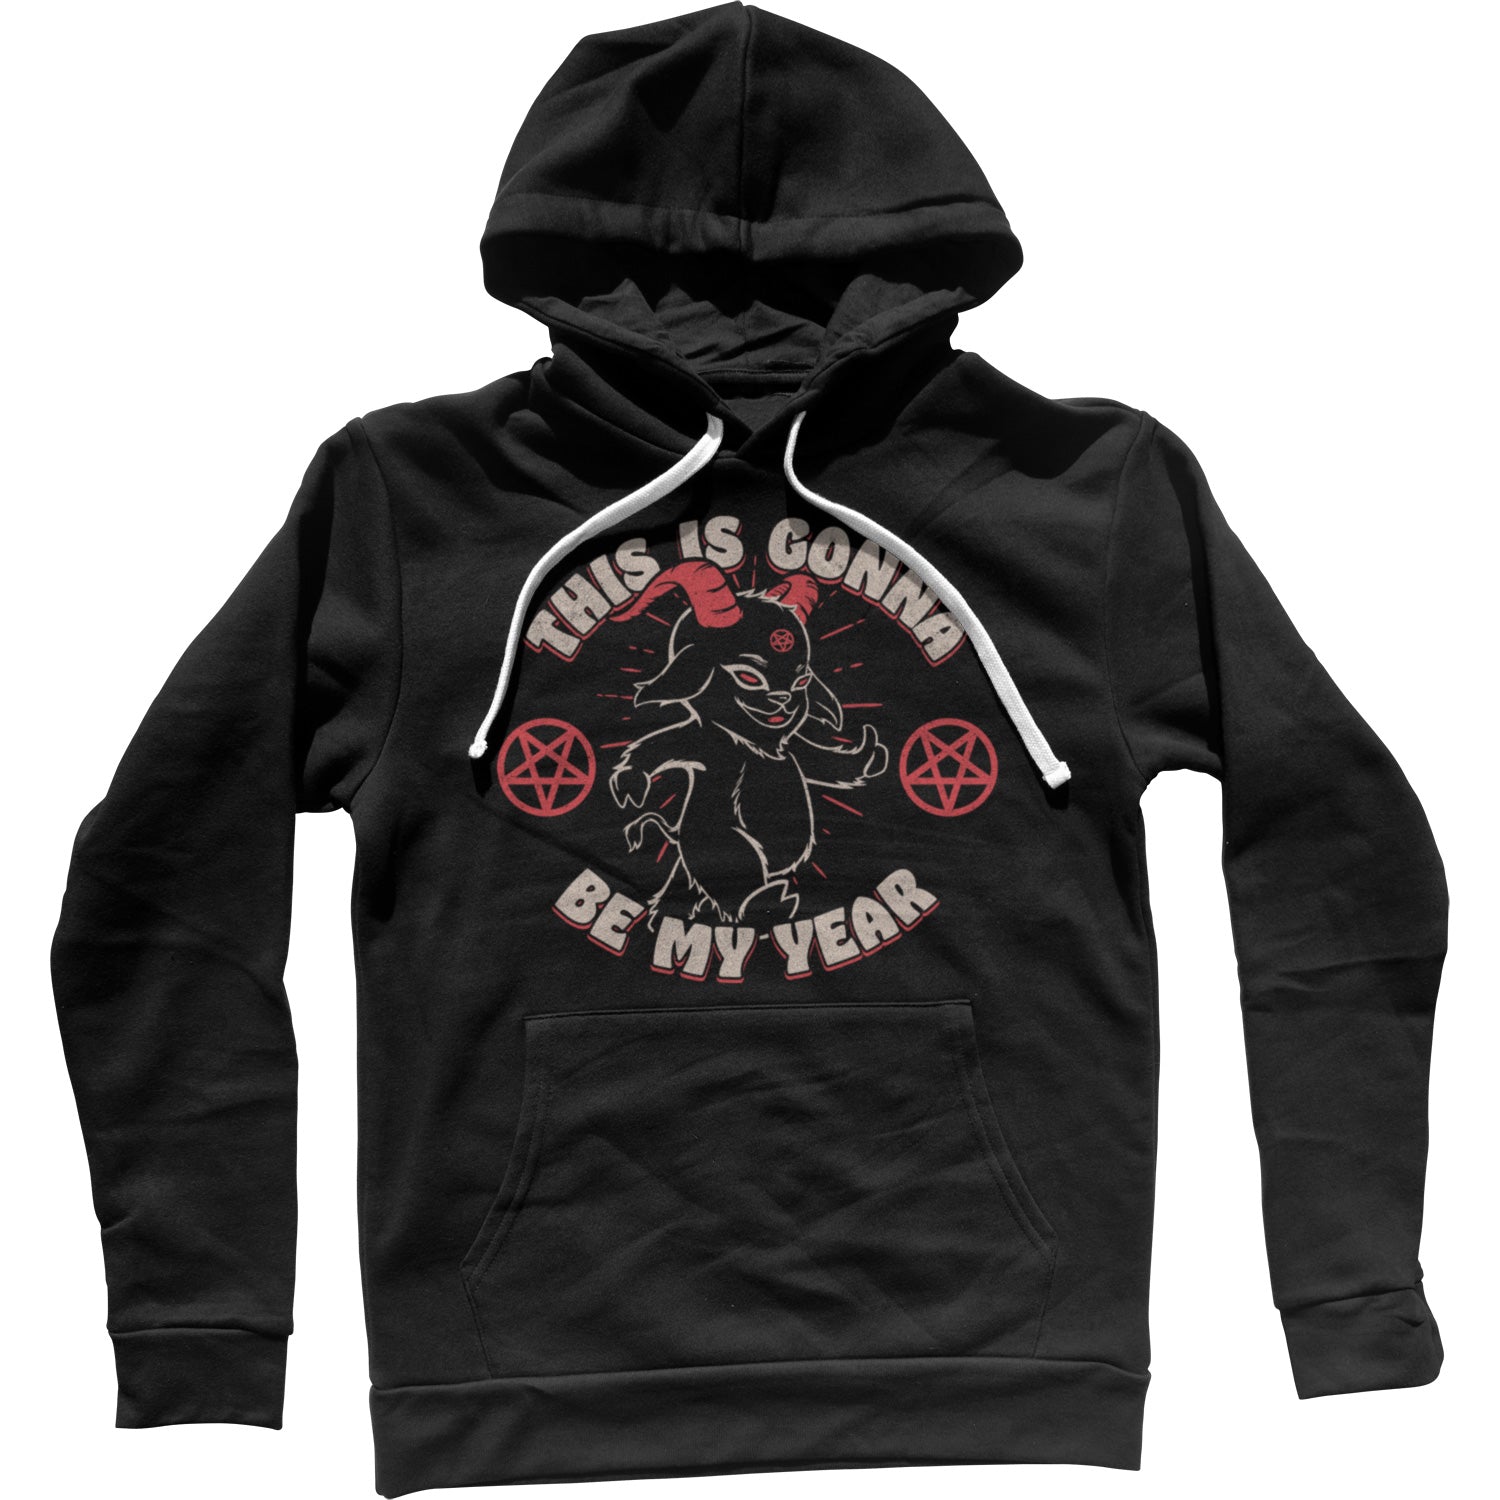 This is Gonna Be My Year Devil Unisex Hoodie